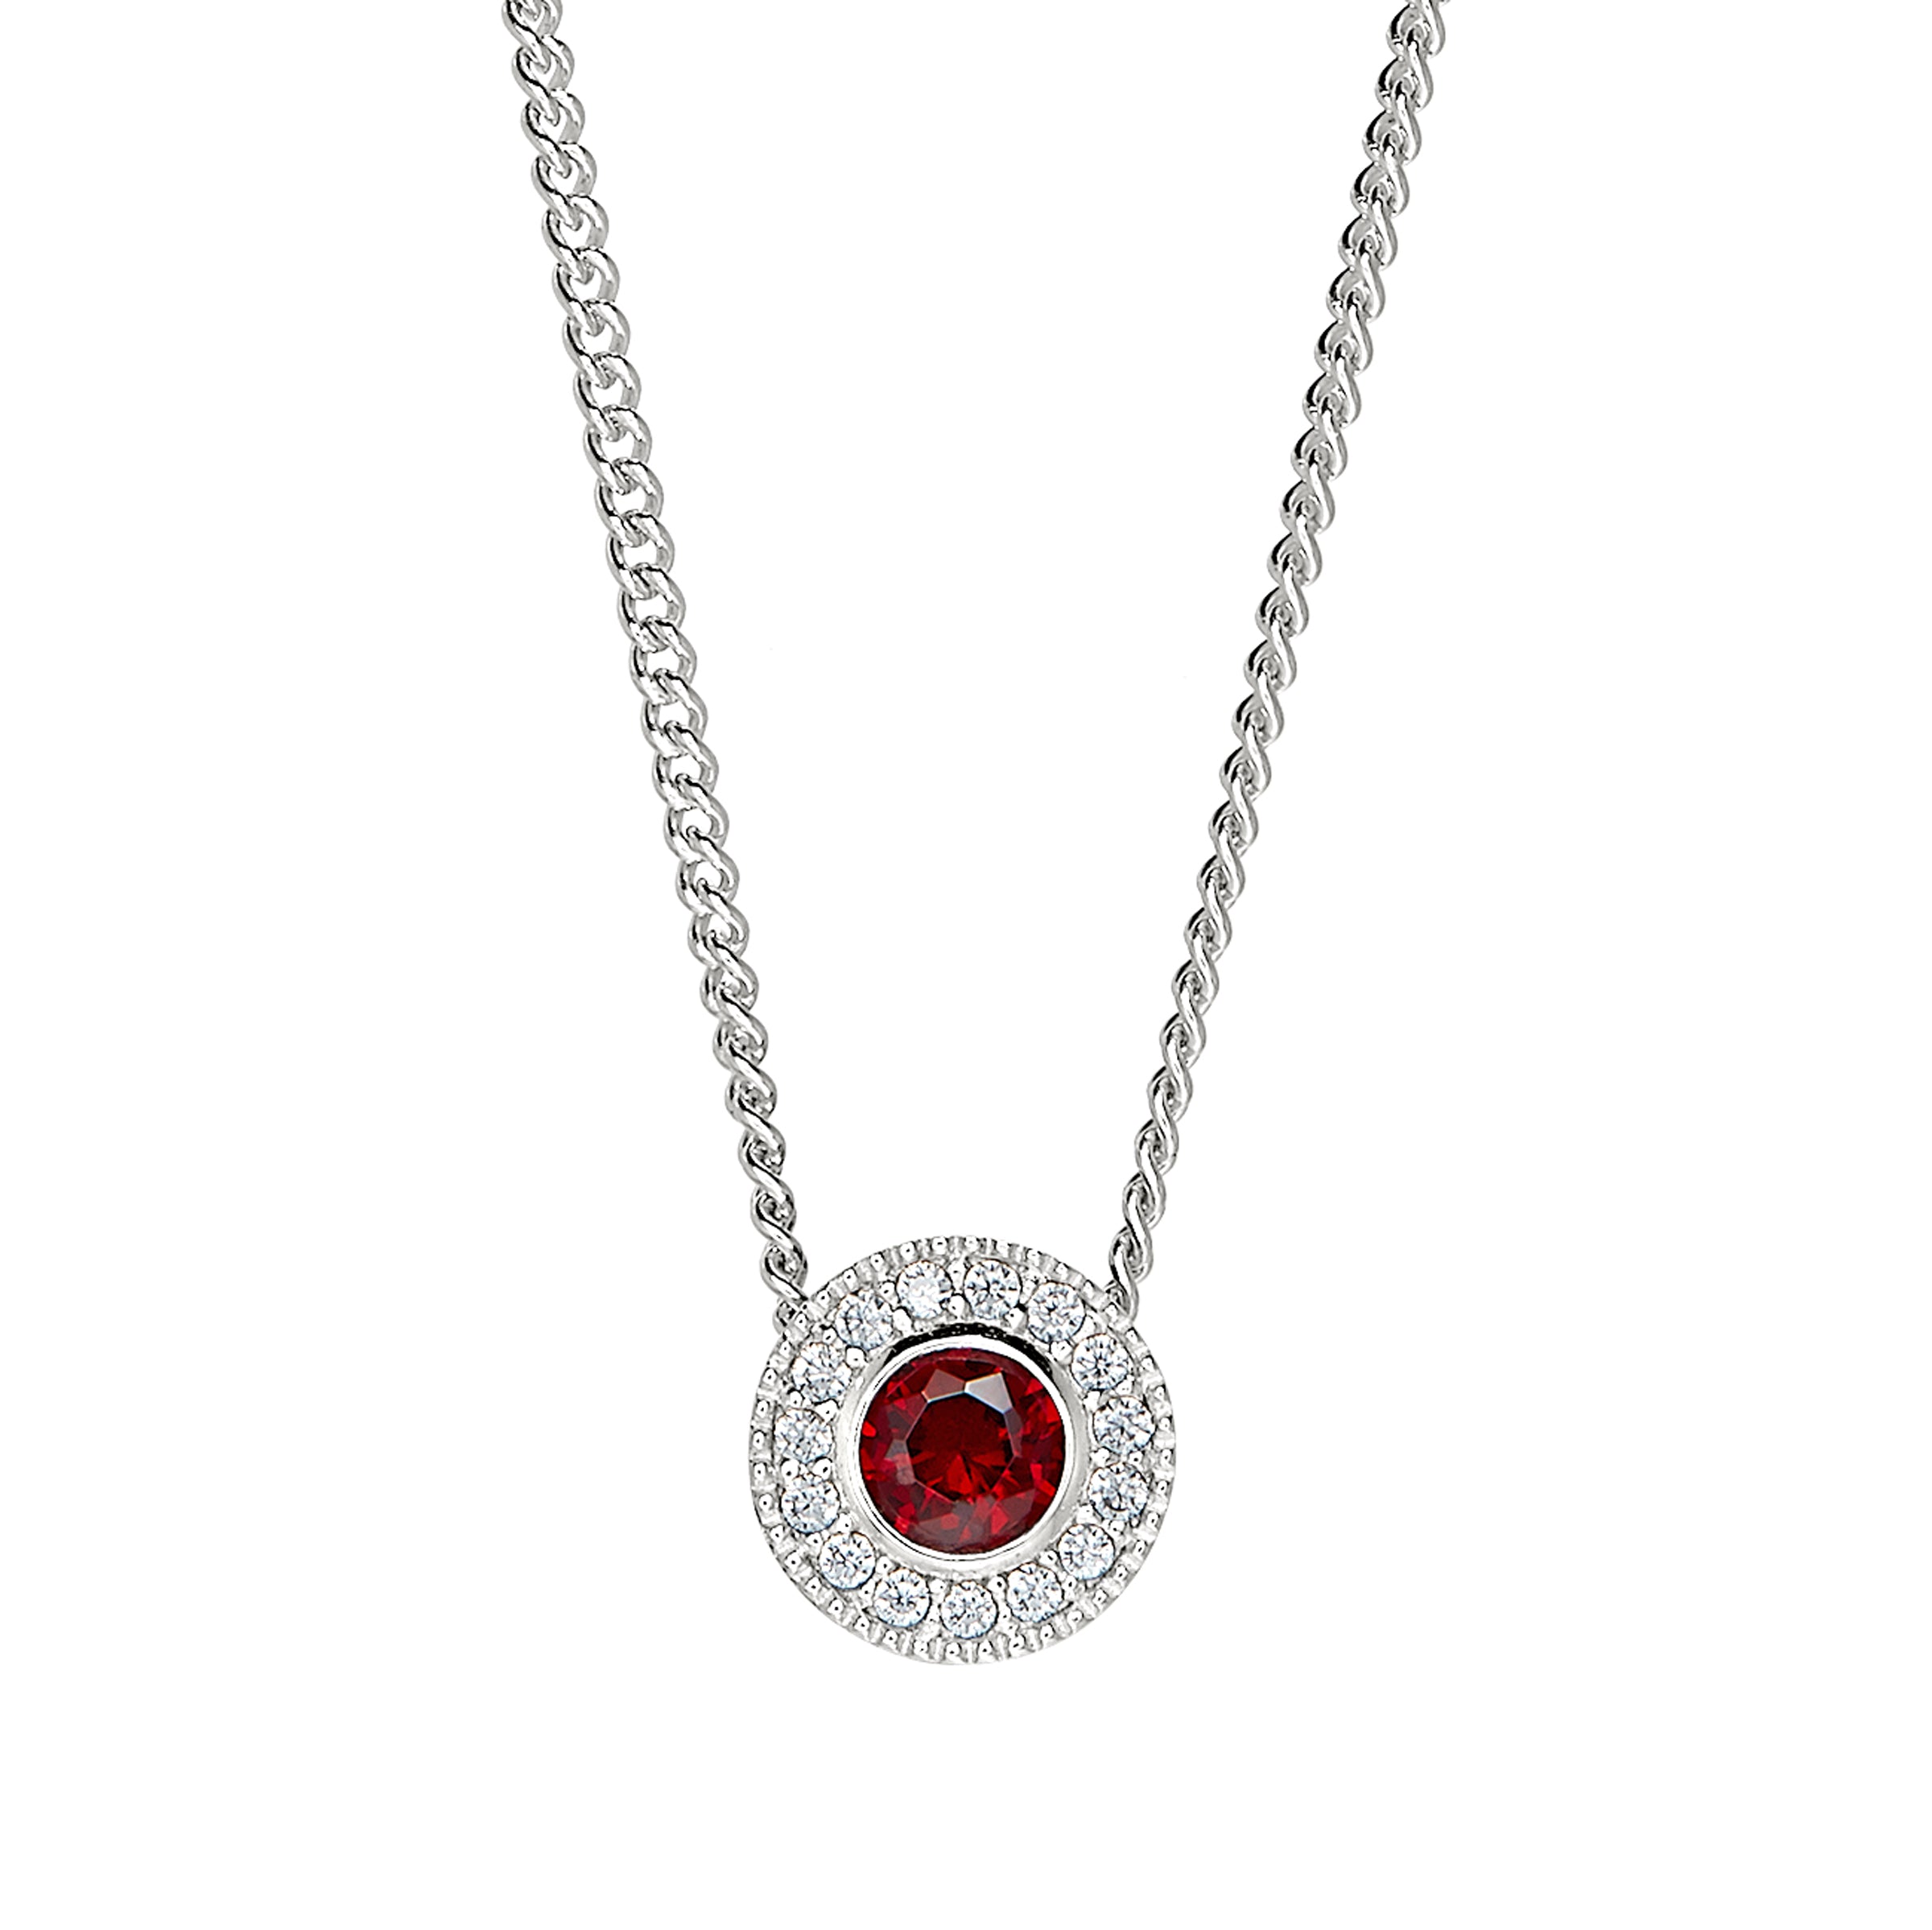 Fernbaugh's "This is Us: Our Life Our Story" Birthstone Necklace